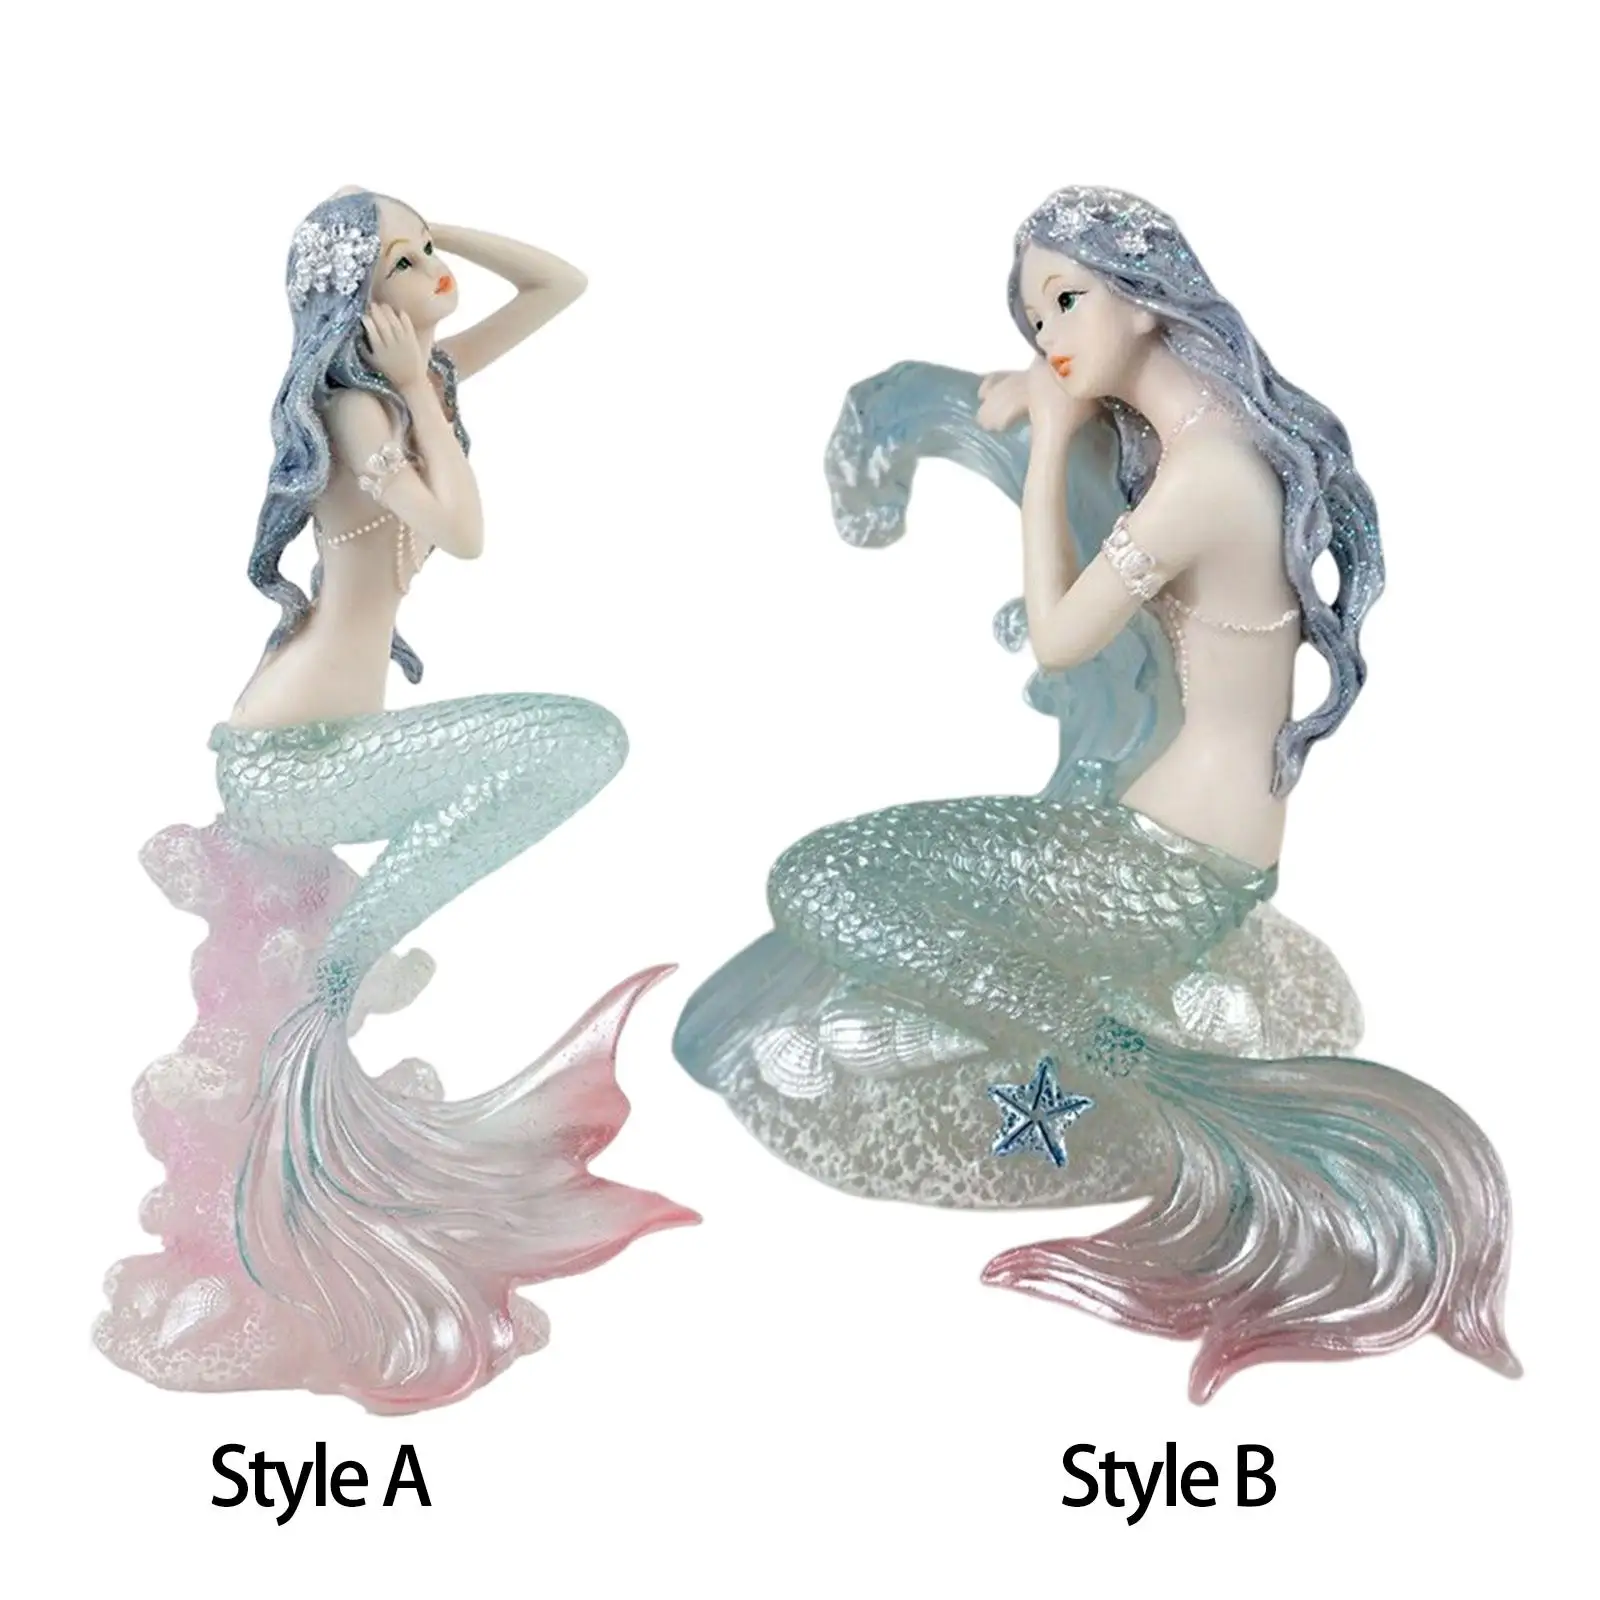 

Mermaid Figurine Maiden Statue Collectible Resin Craft for Home Decoration